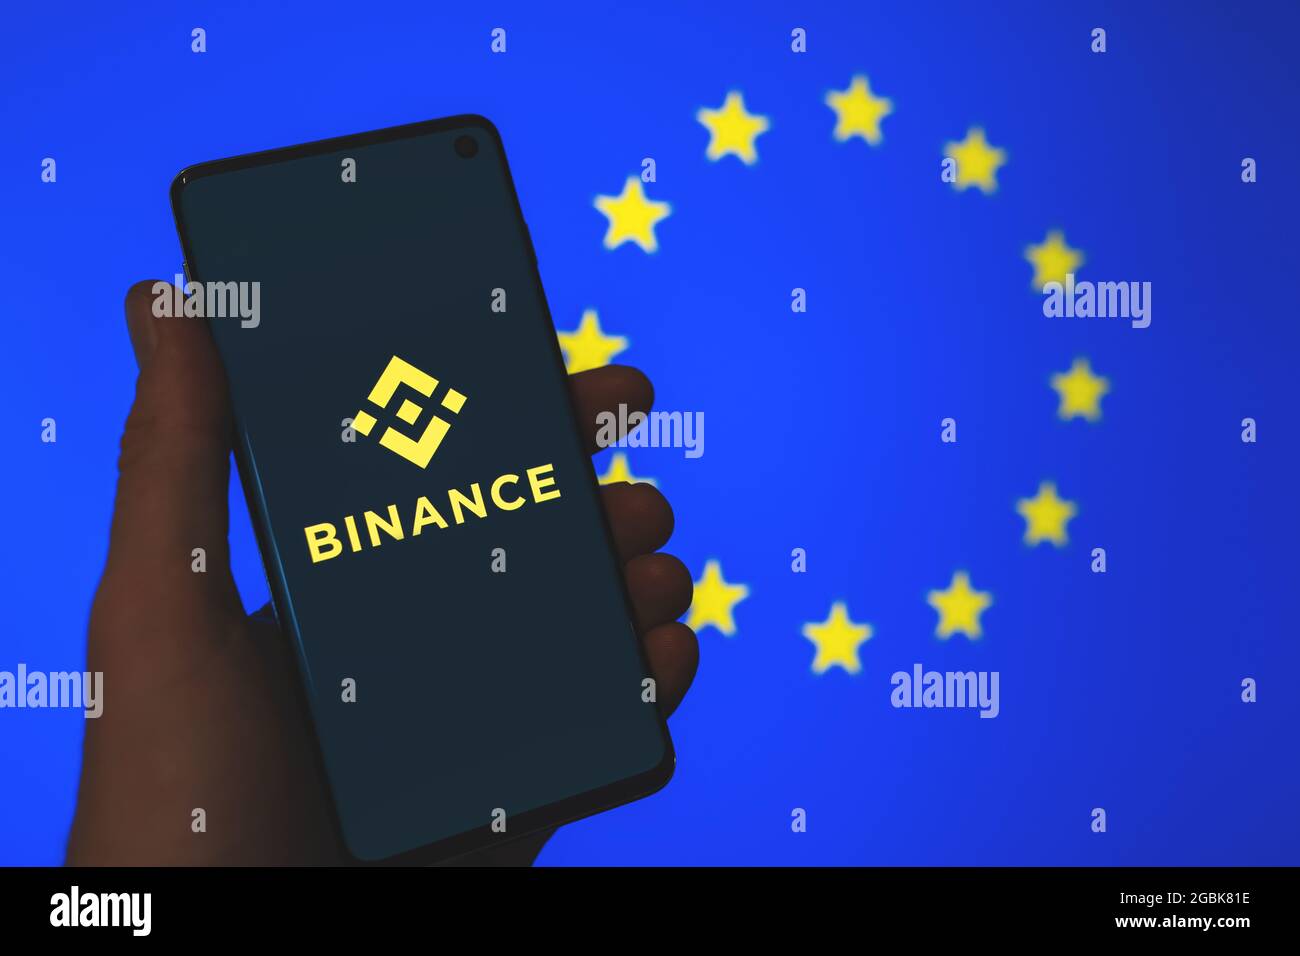 Binance app logo on smartphone in hand with the blurred European Union flag background. Binance in Europe, EU regulations news. Crypto exchange Stock Photo